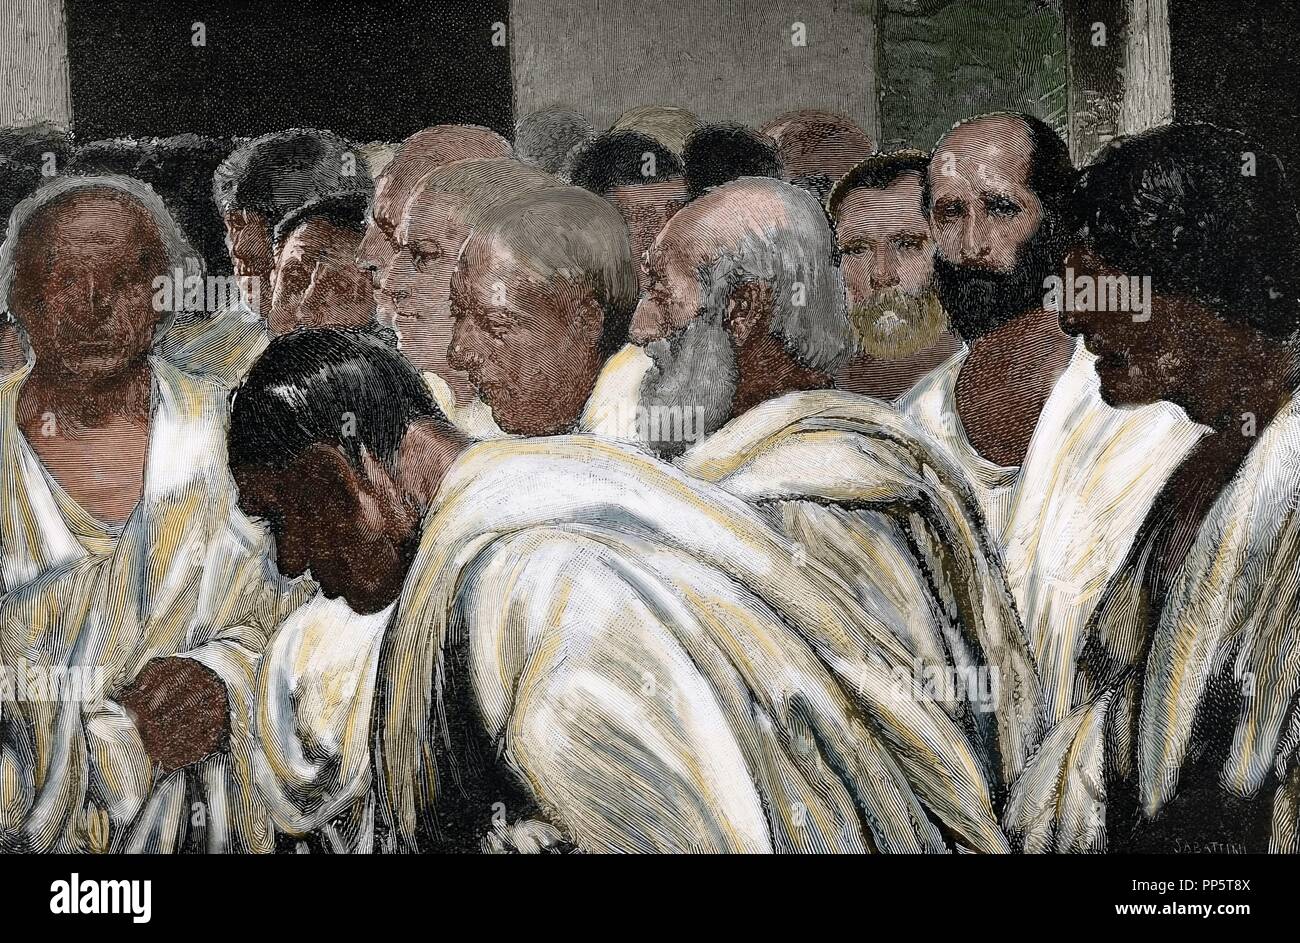 Appius Claudius the Censor (340-273 BC). Roman Censor. Engraving by Sabattini after a fresco by Cesare Maccari. The Iberian Illustration, 1898. Colored. Stock Photo